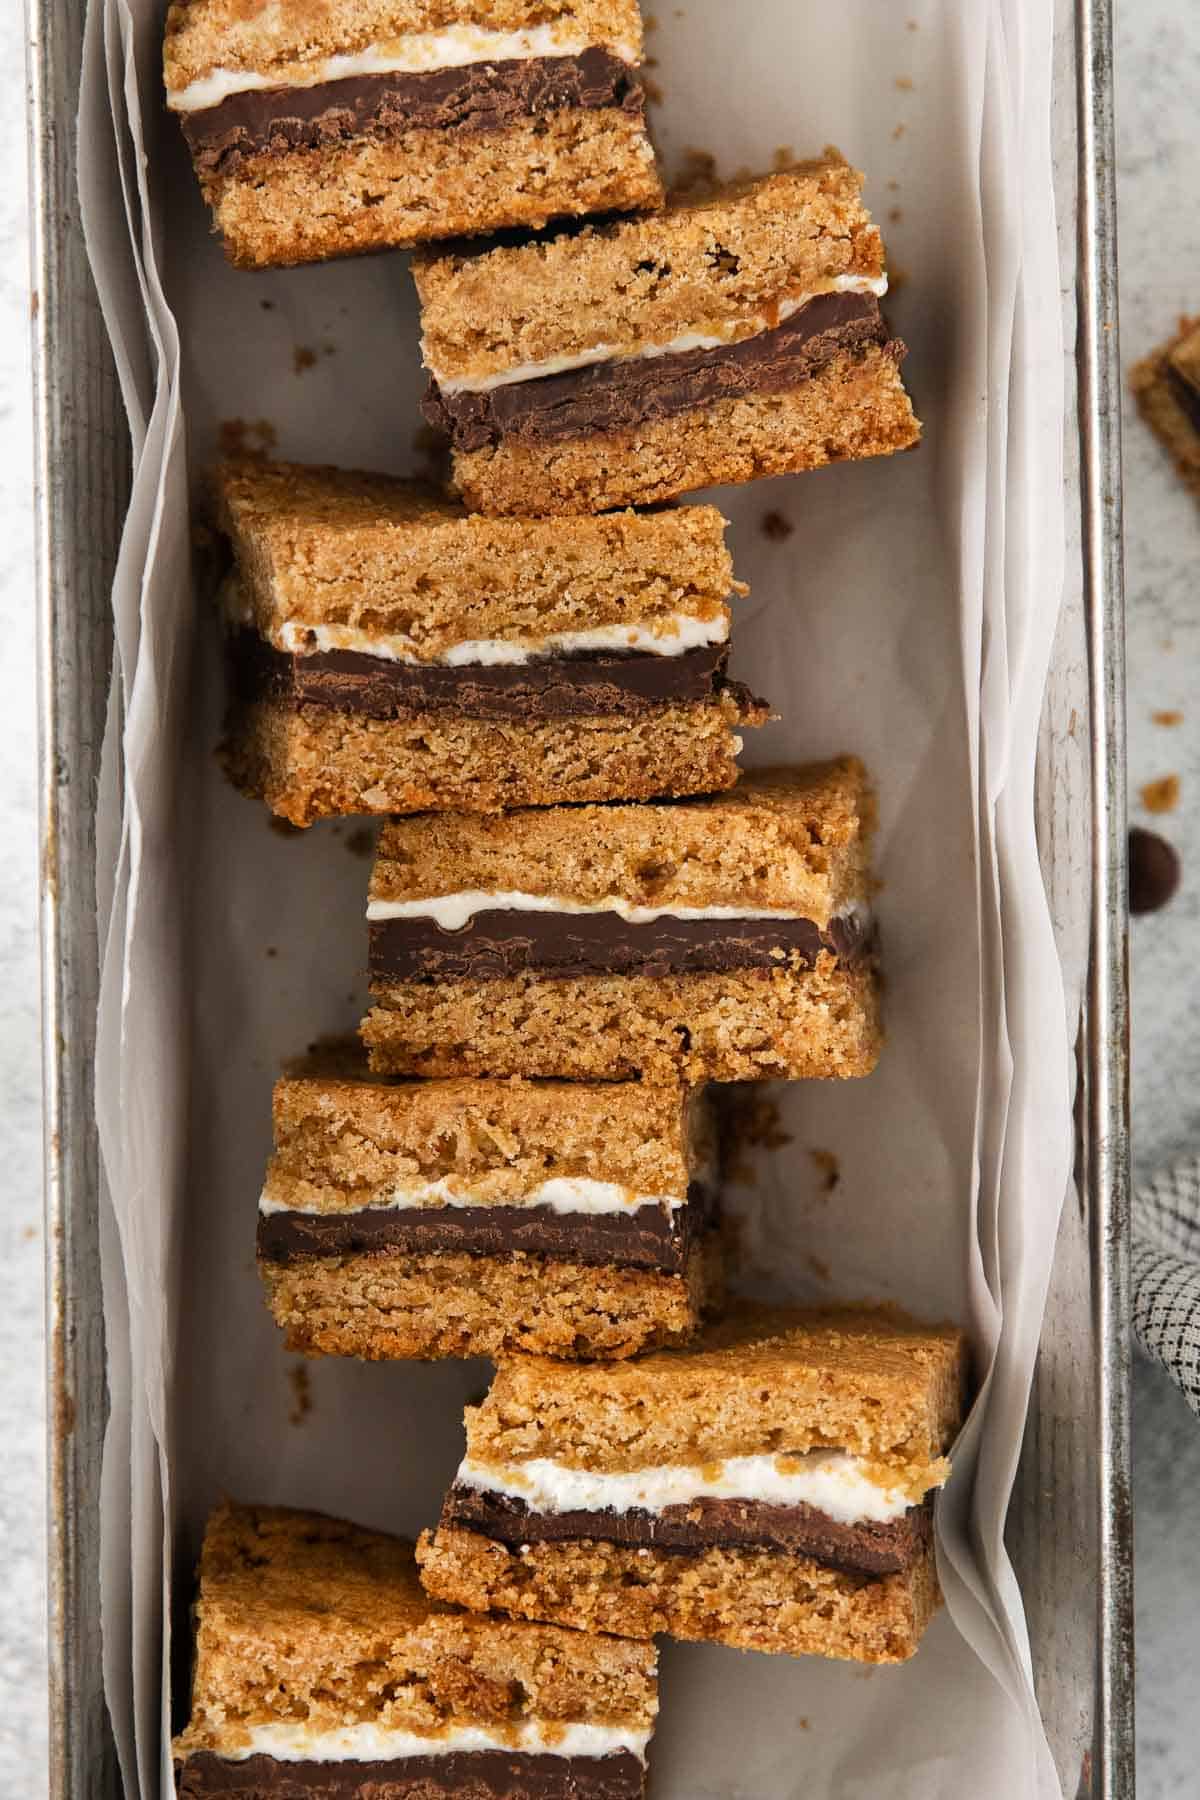 Gluten-free s'mores bars in a baking pan